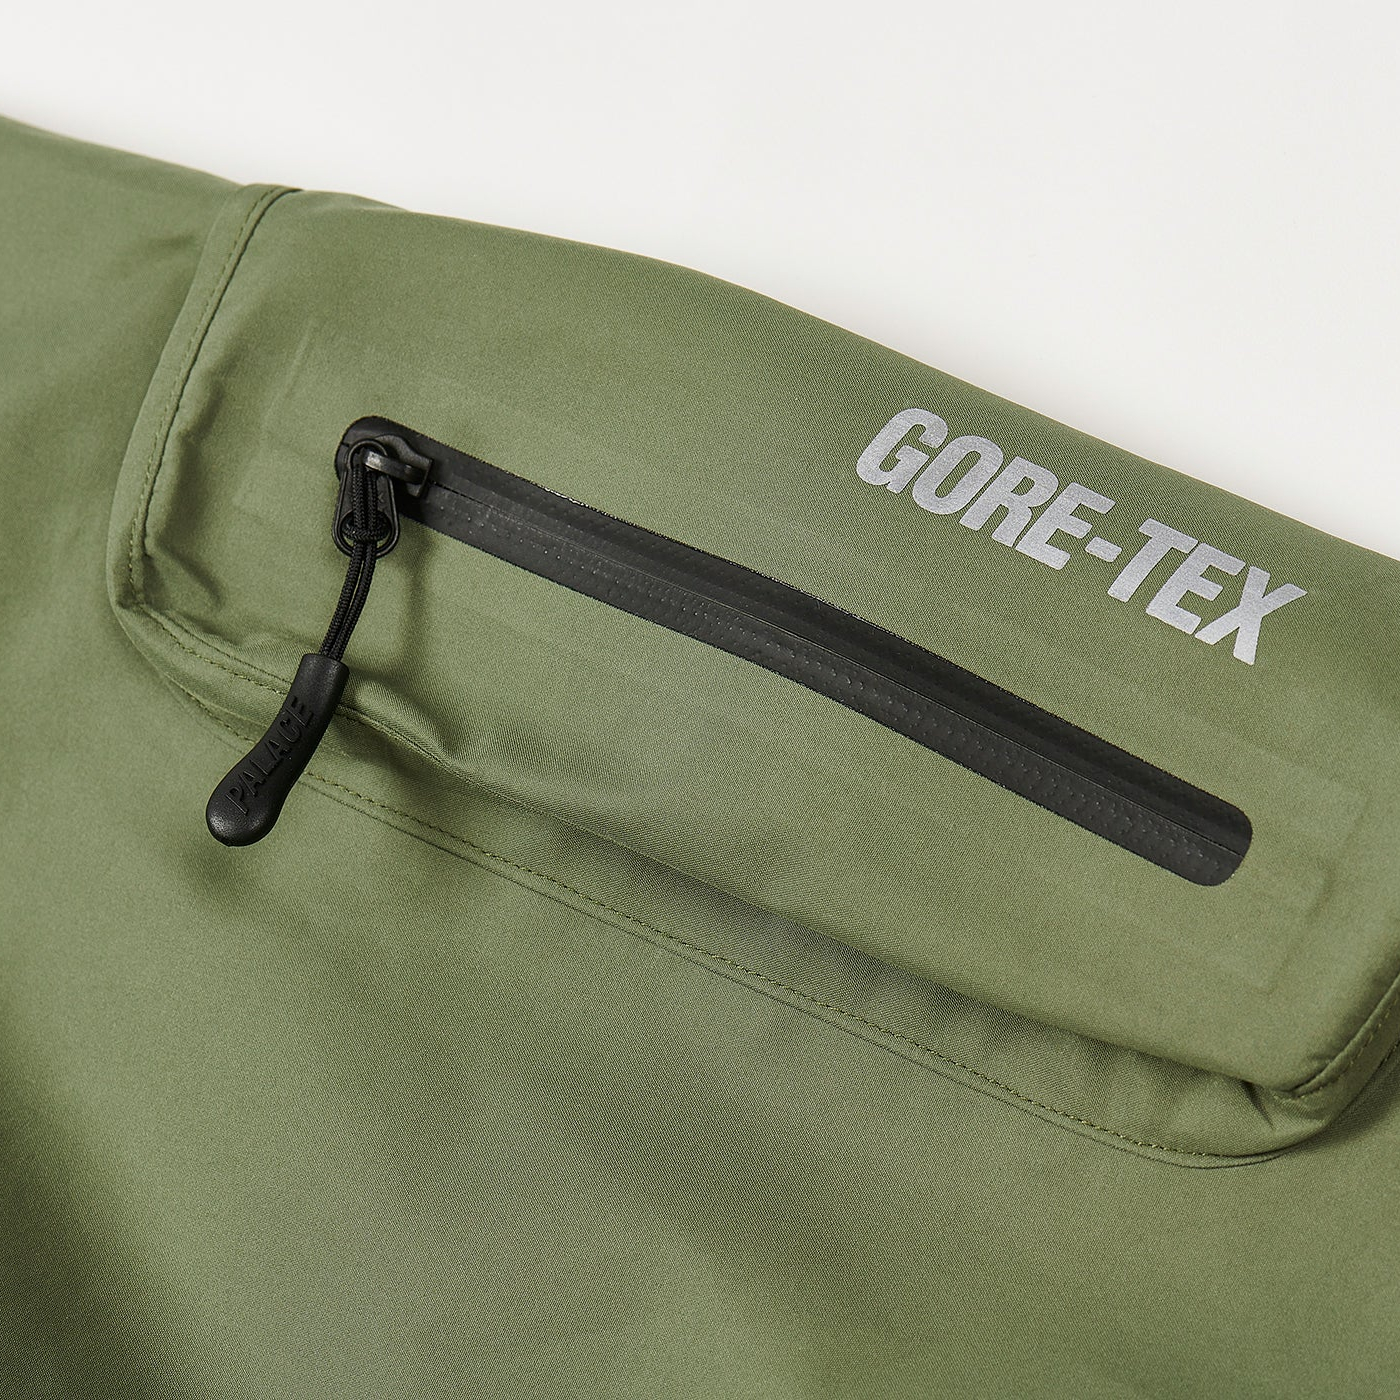 Thumbnail GORE-TEX CARGO JACKET OLIVE one color